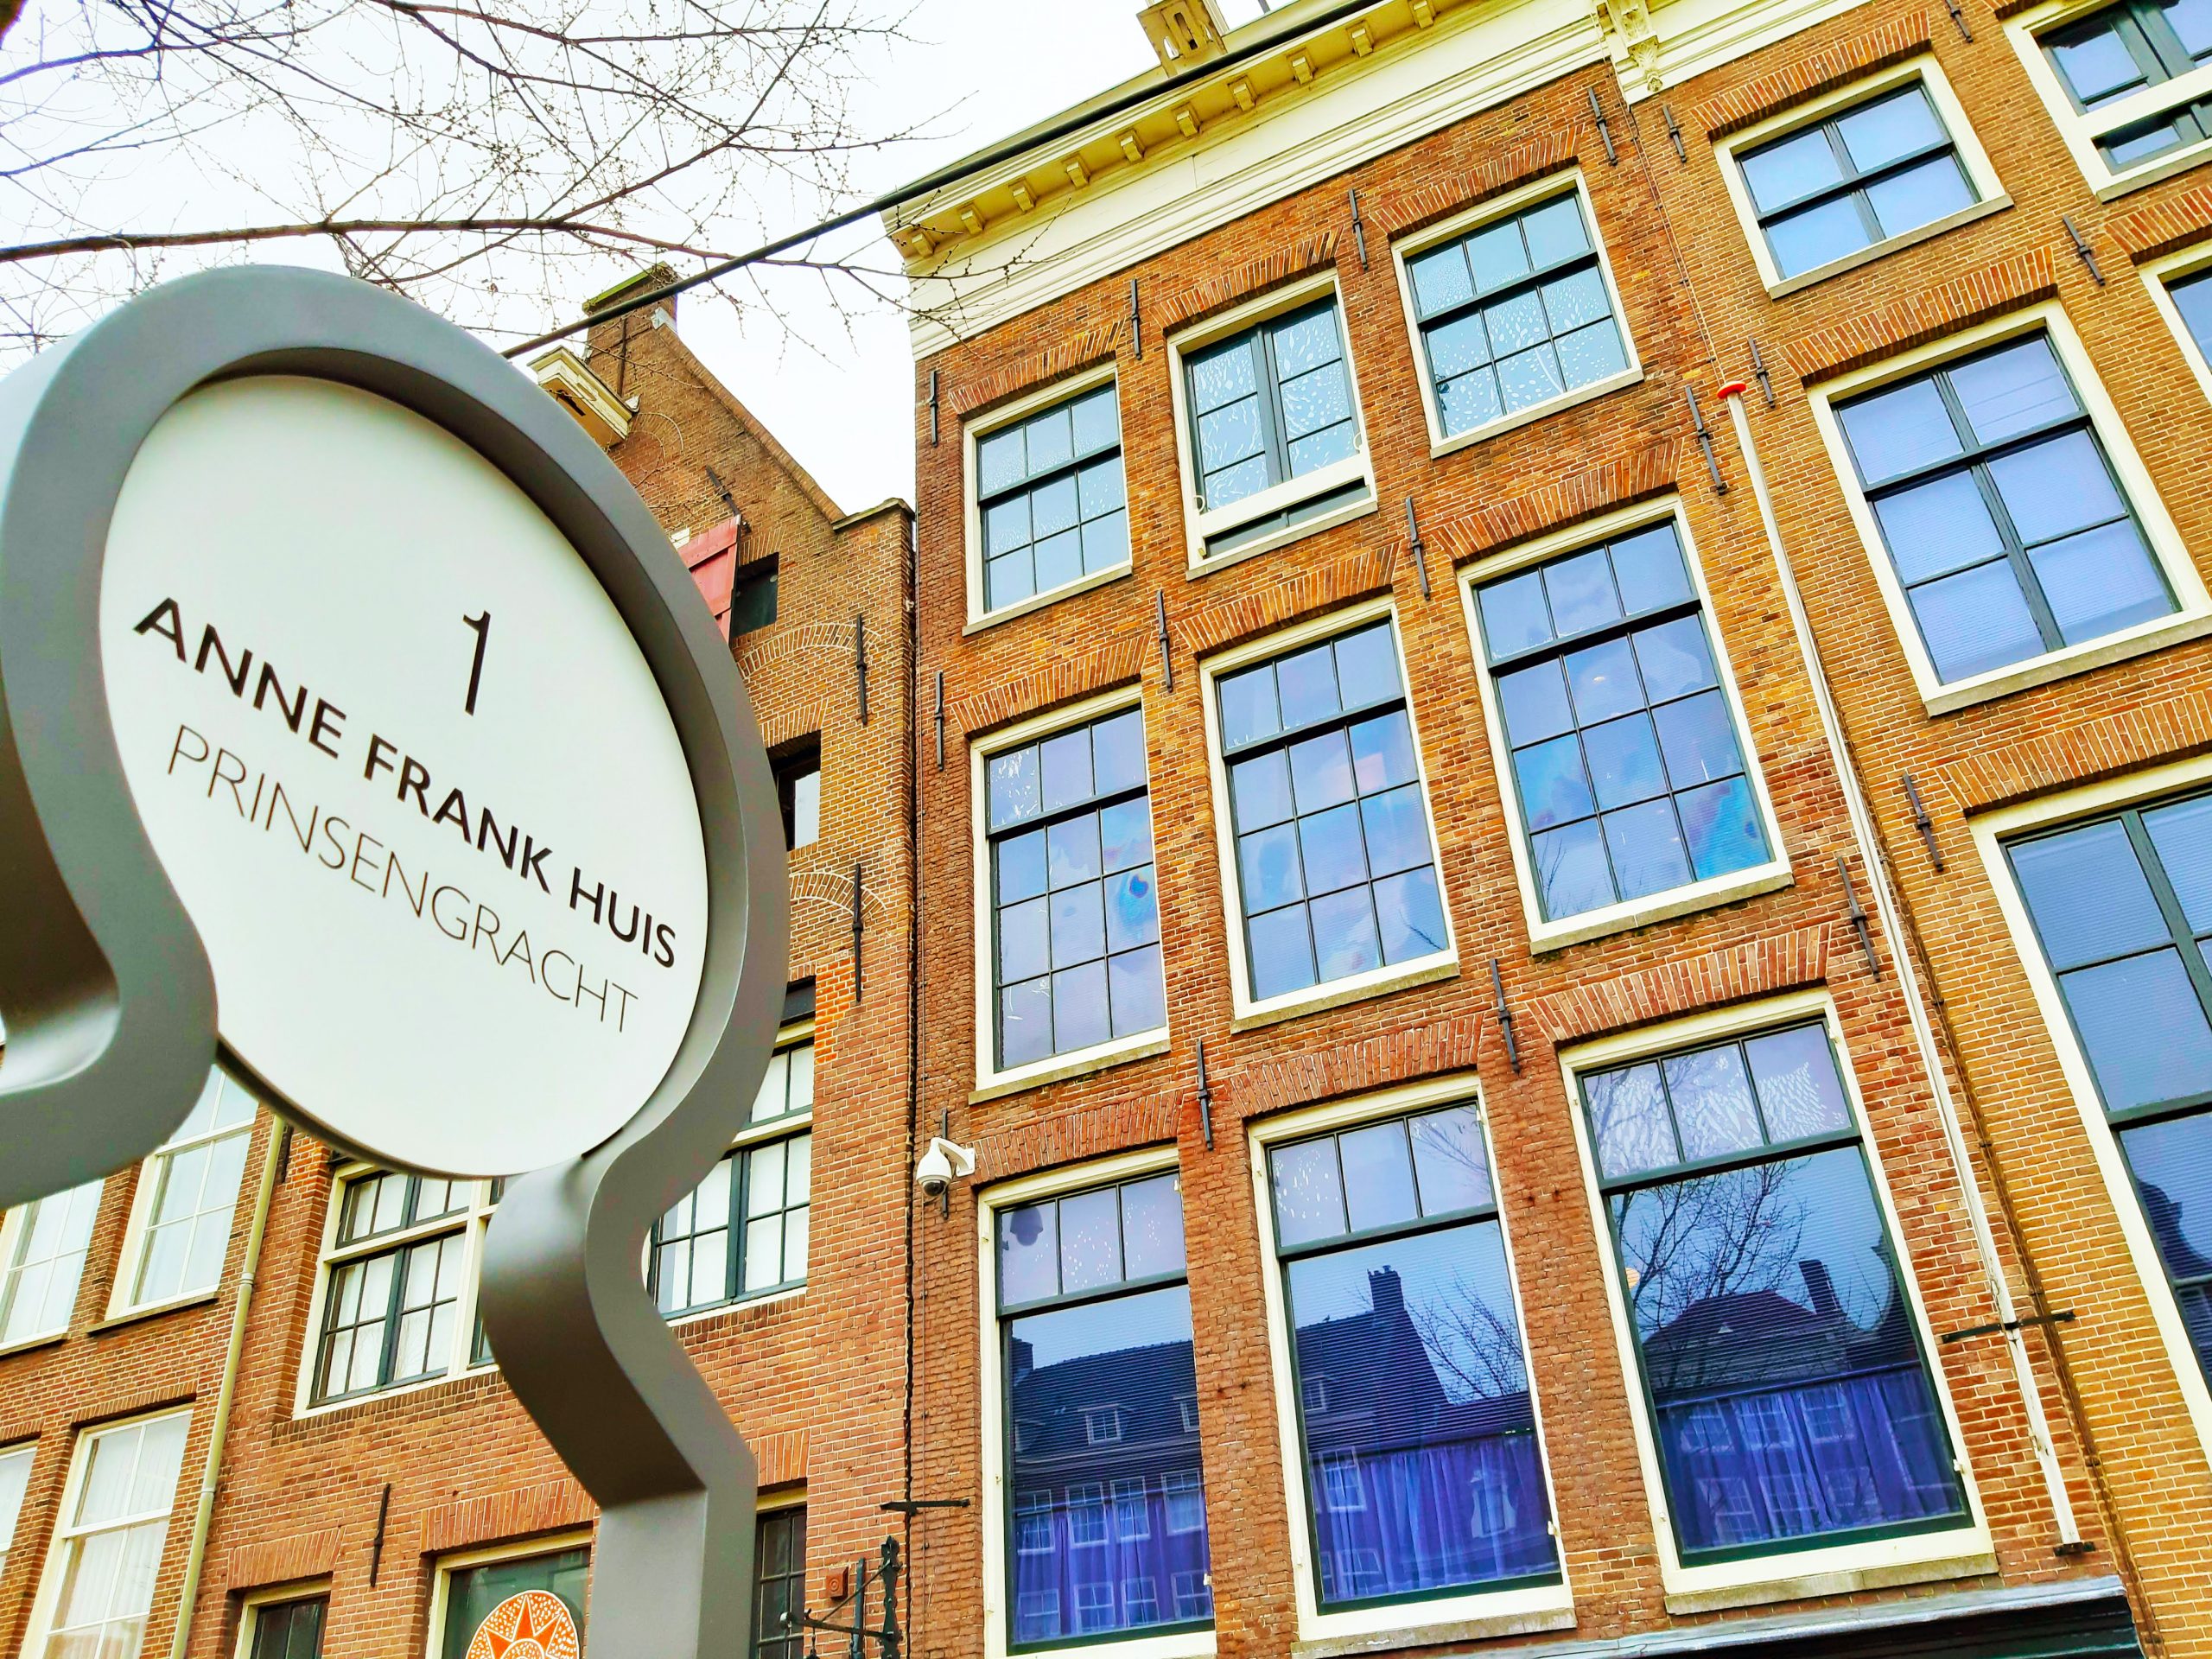 Exterior of the Anne Frank House